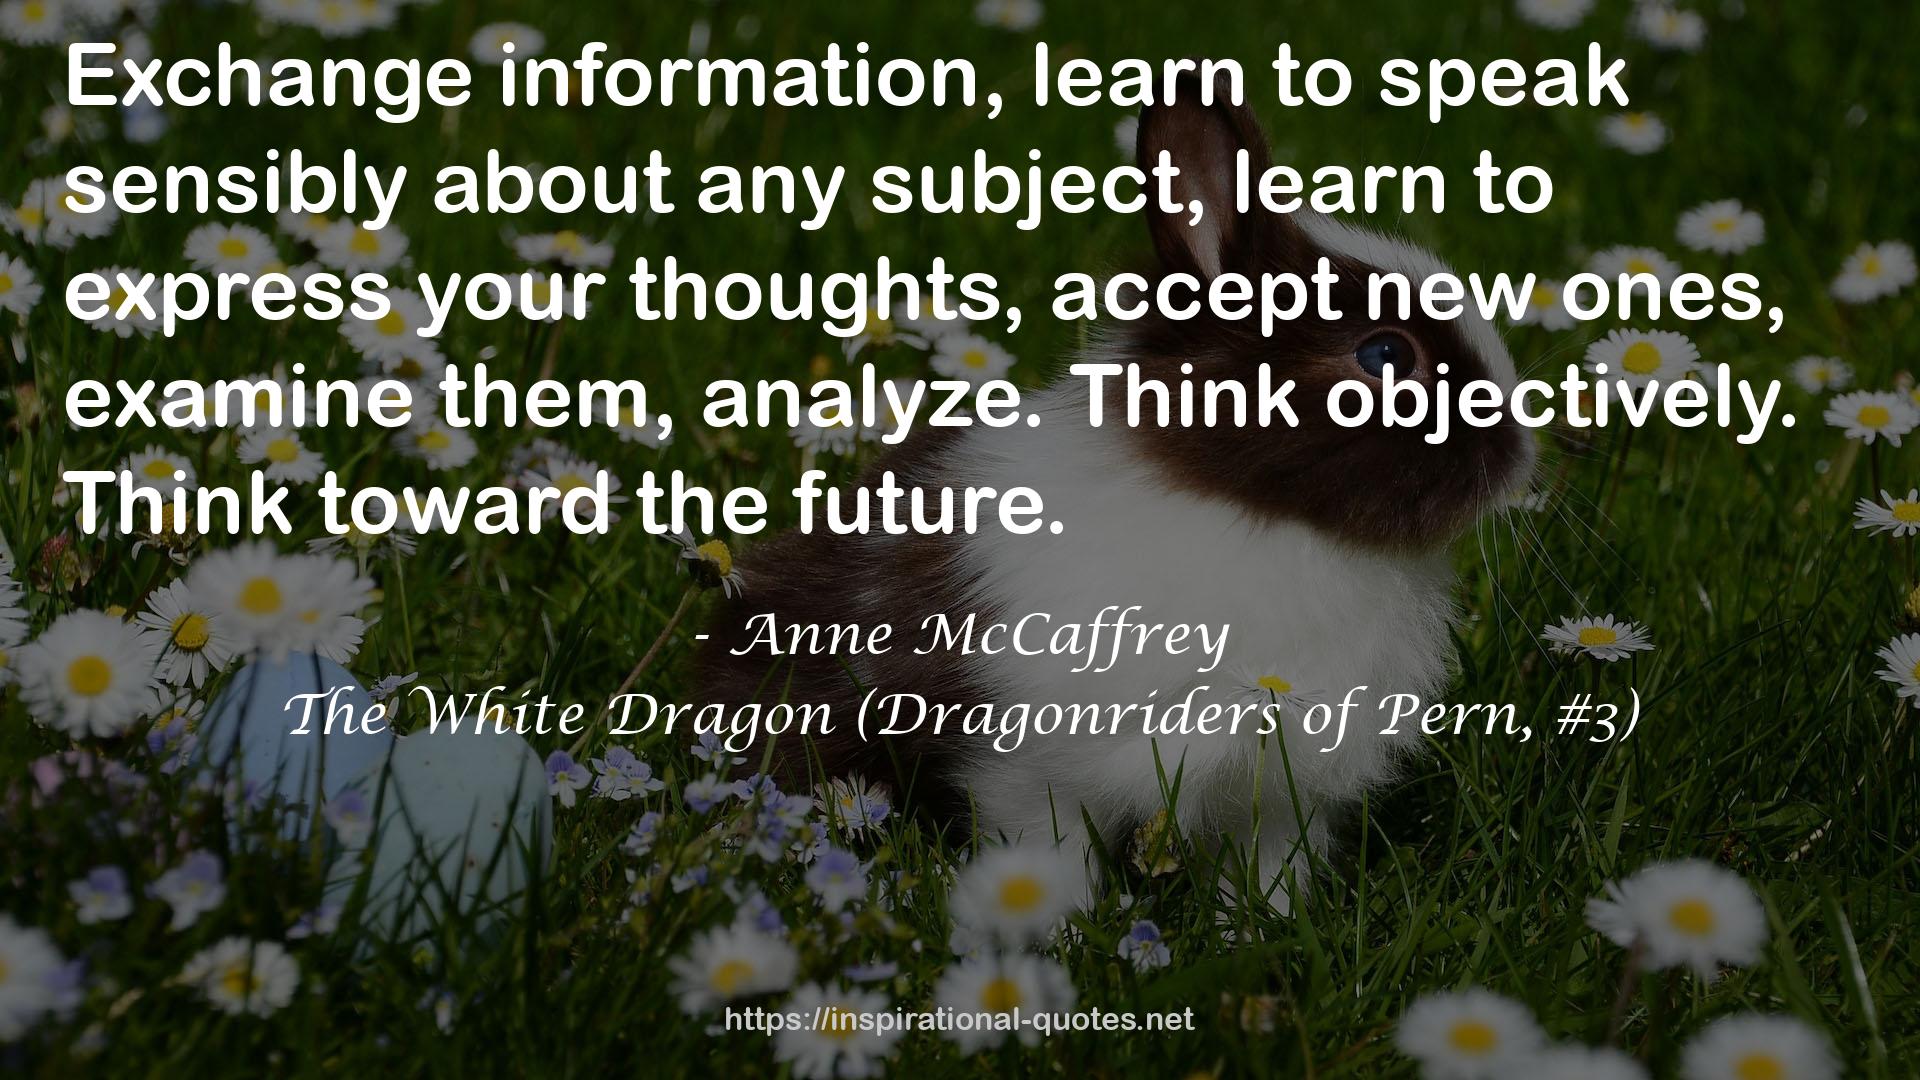 The White Dragon (Dragonriders of Pern, #3) QUOTES